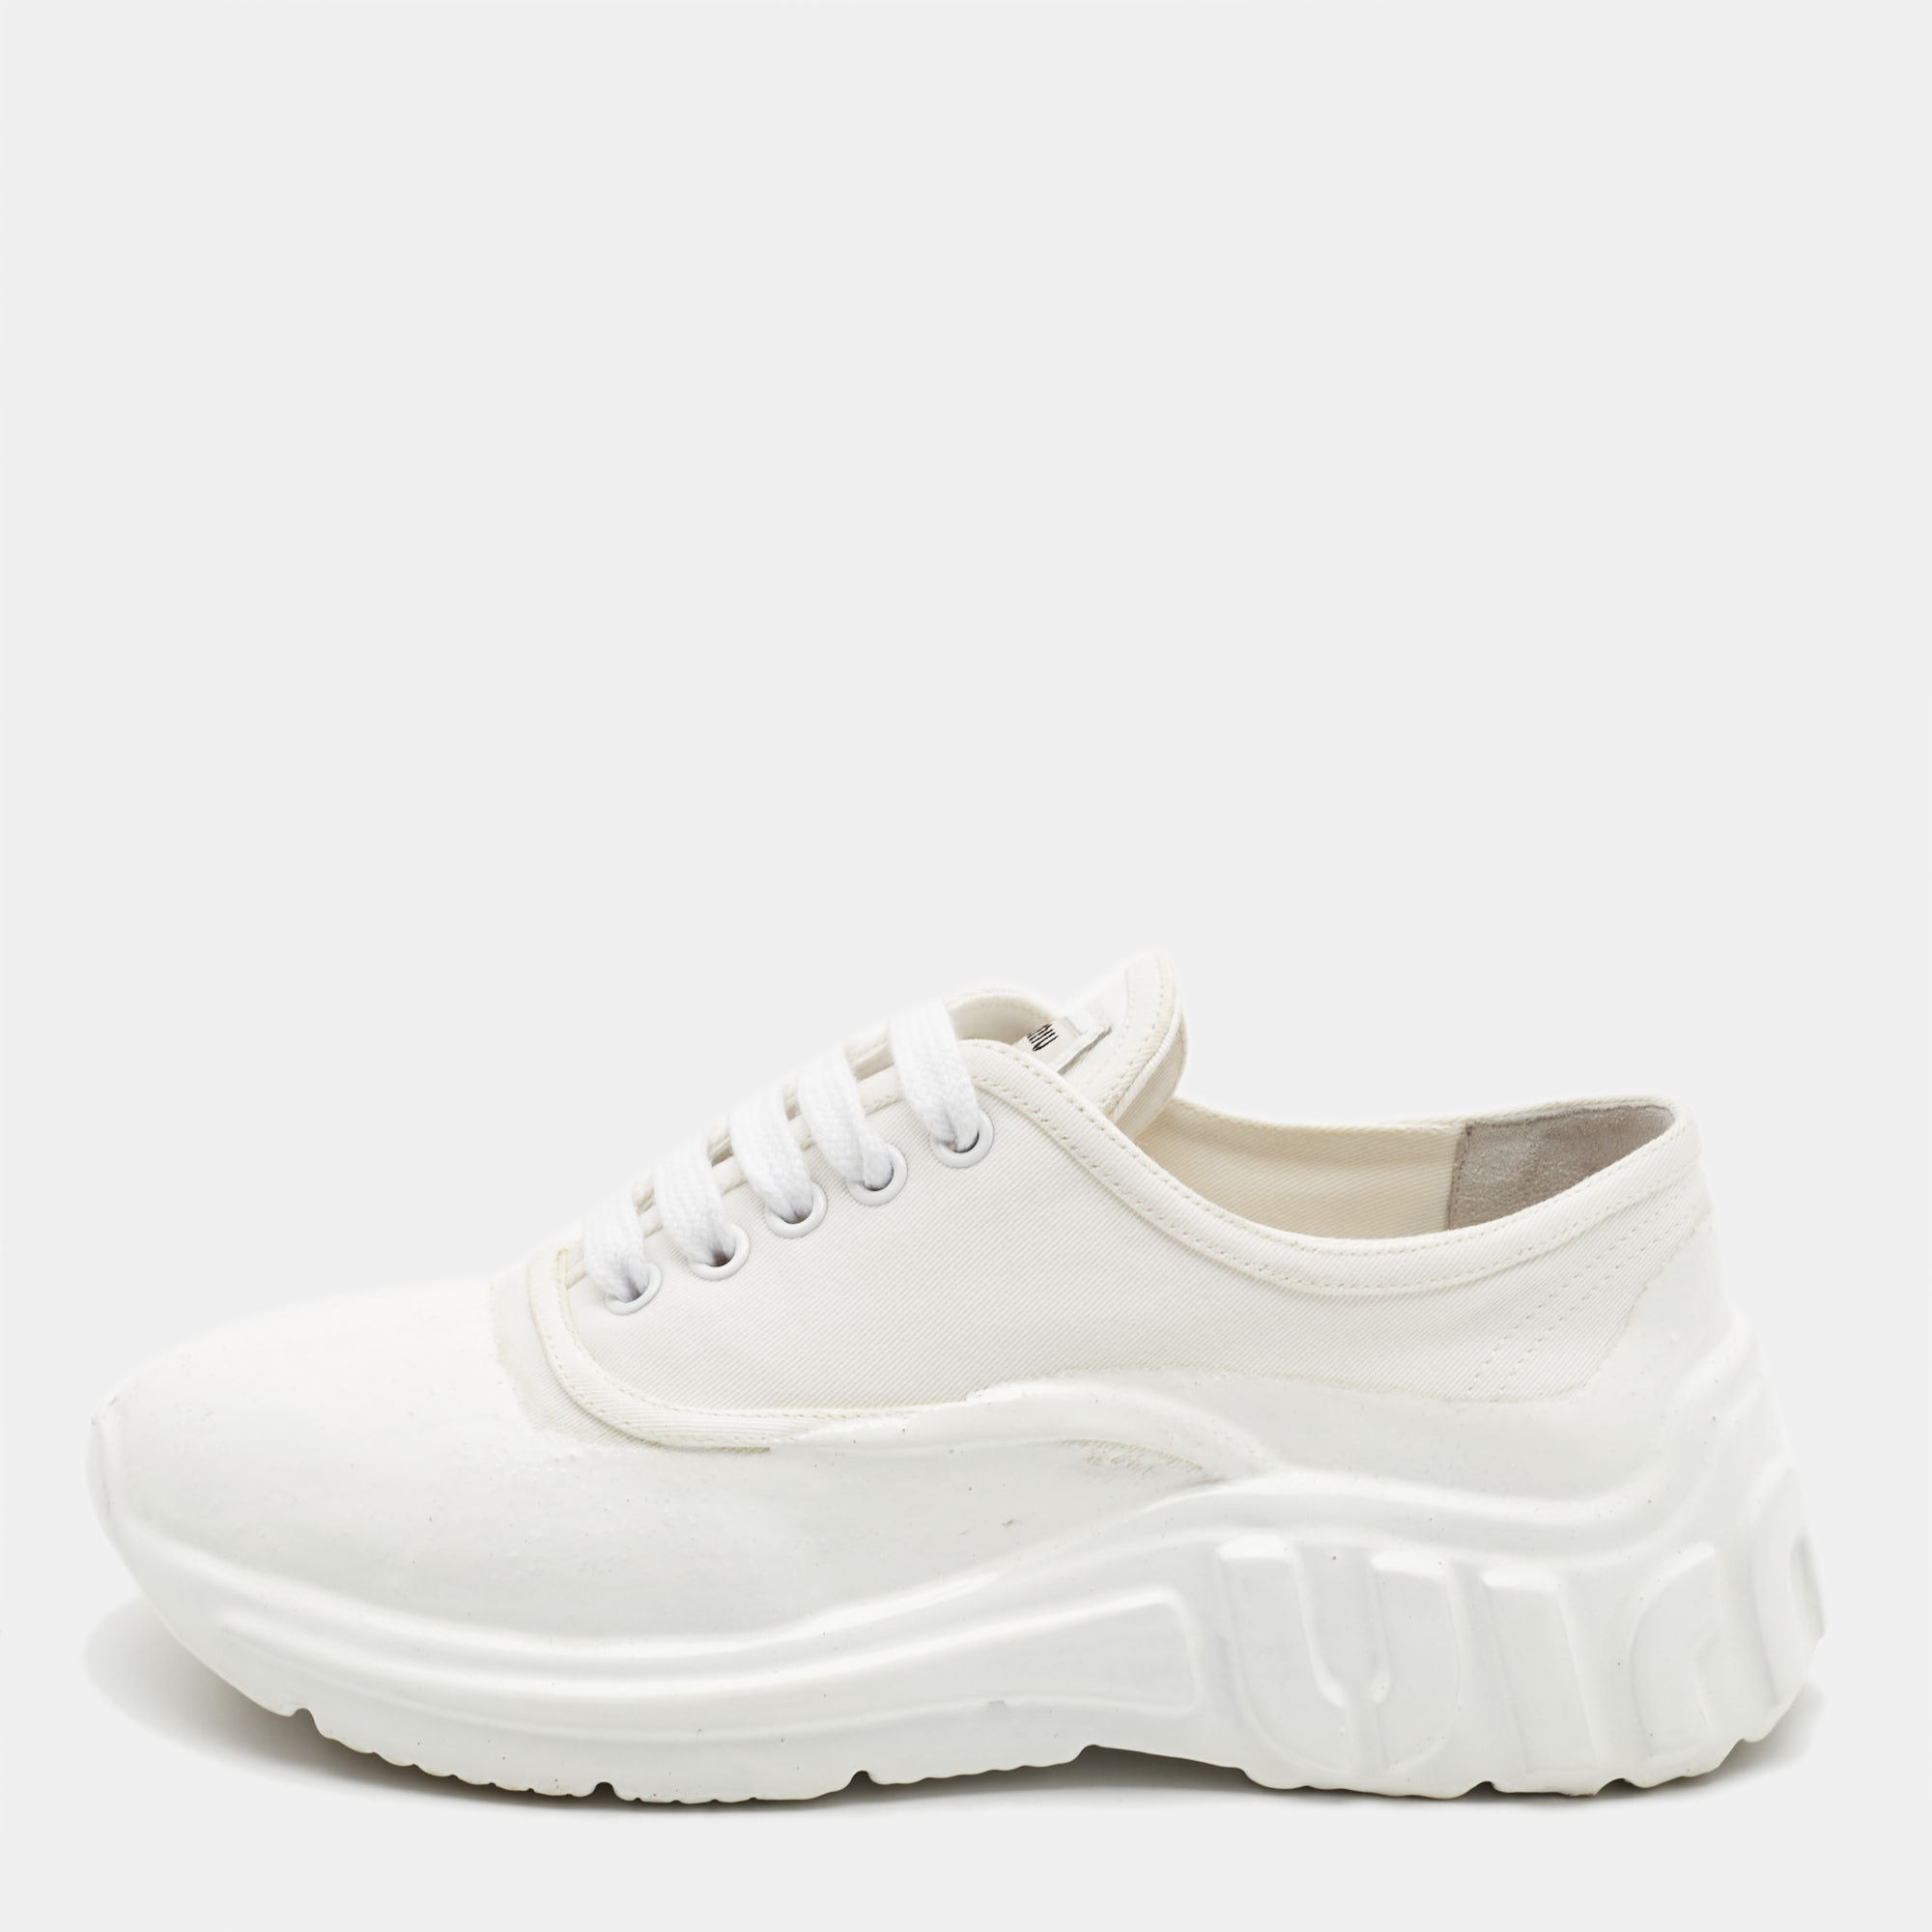 Miu miu white canvas and rubber low top sneakers size 37